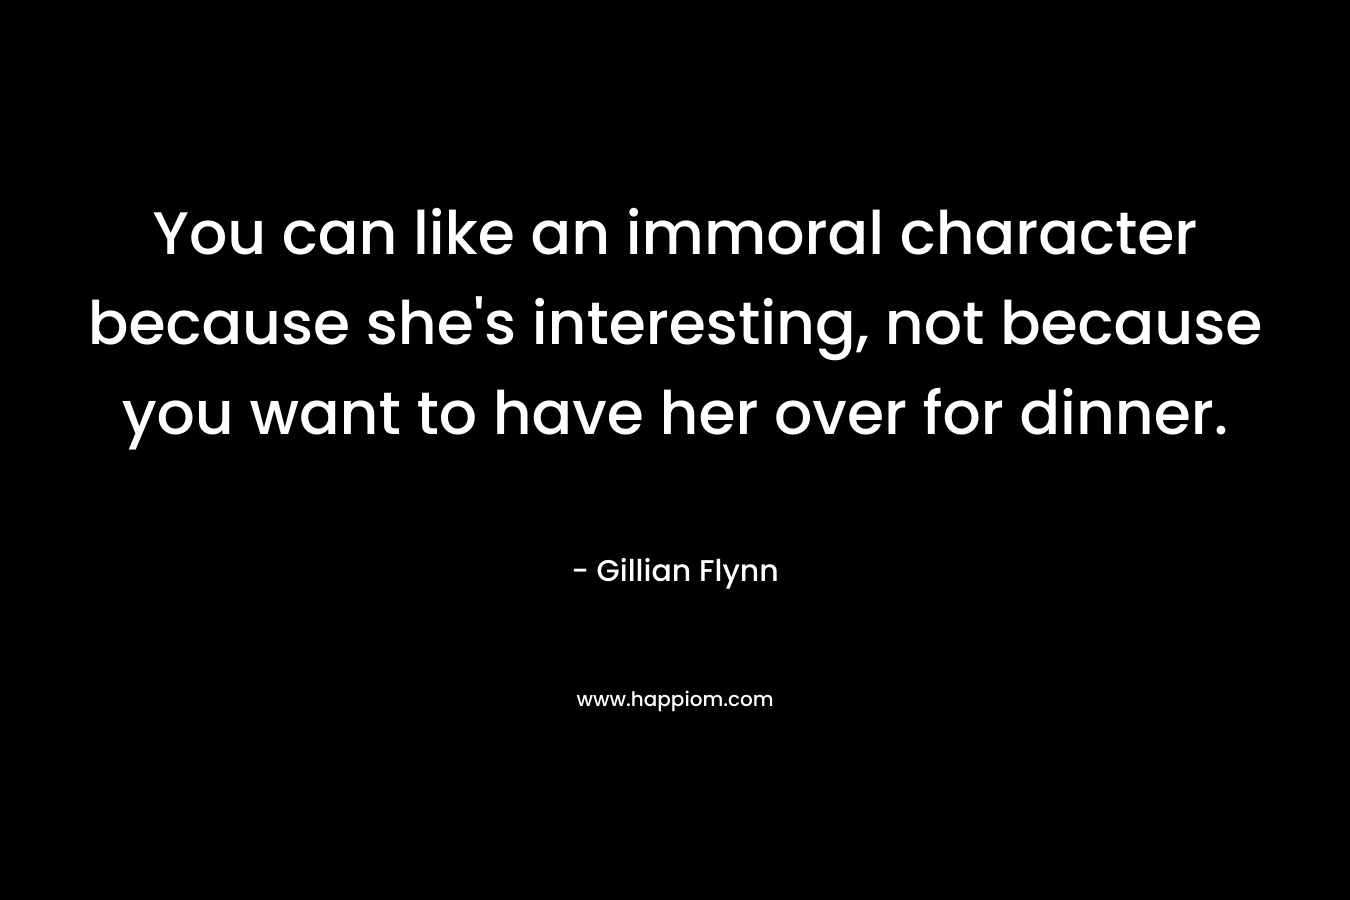 You can like an immoral character because she’s interesting, not because you want to have her over for dinner. – Gillian Flynn